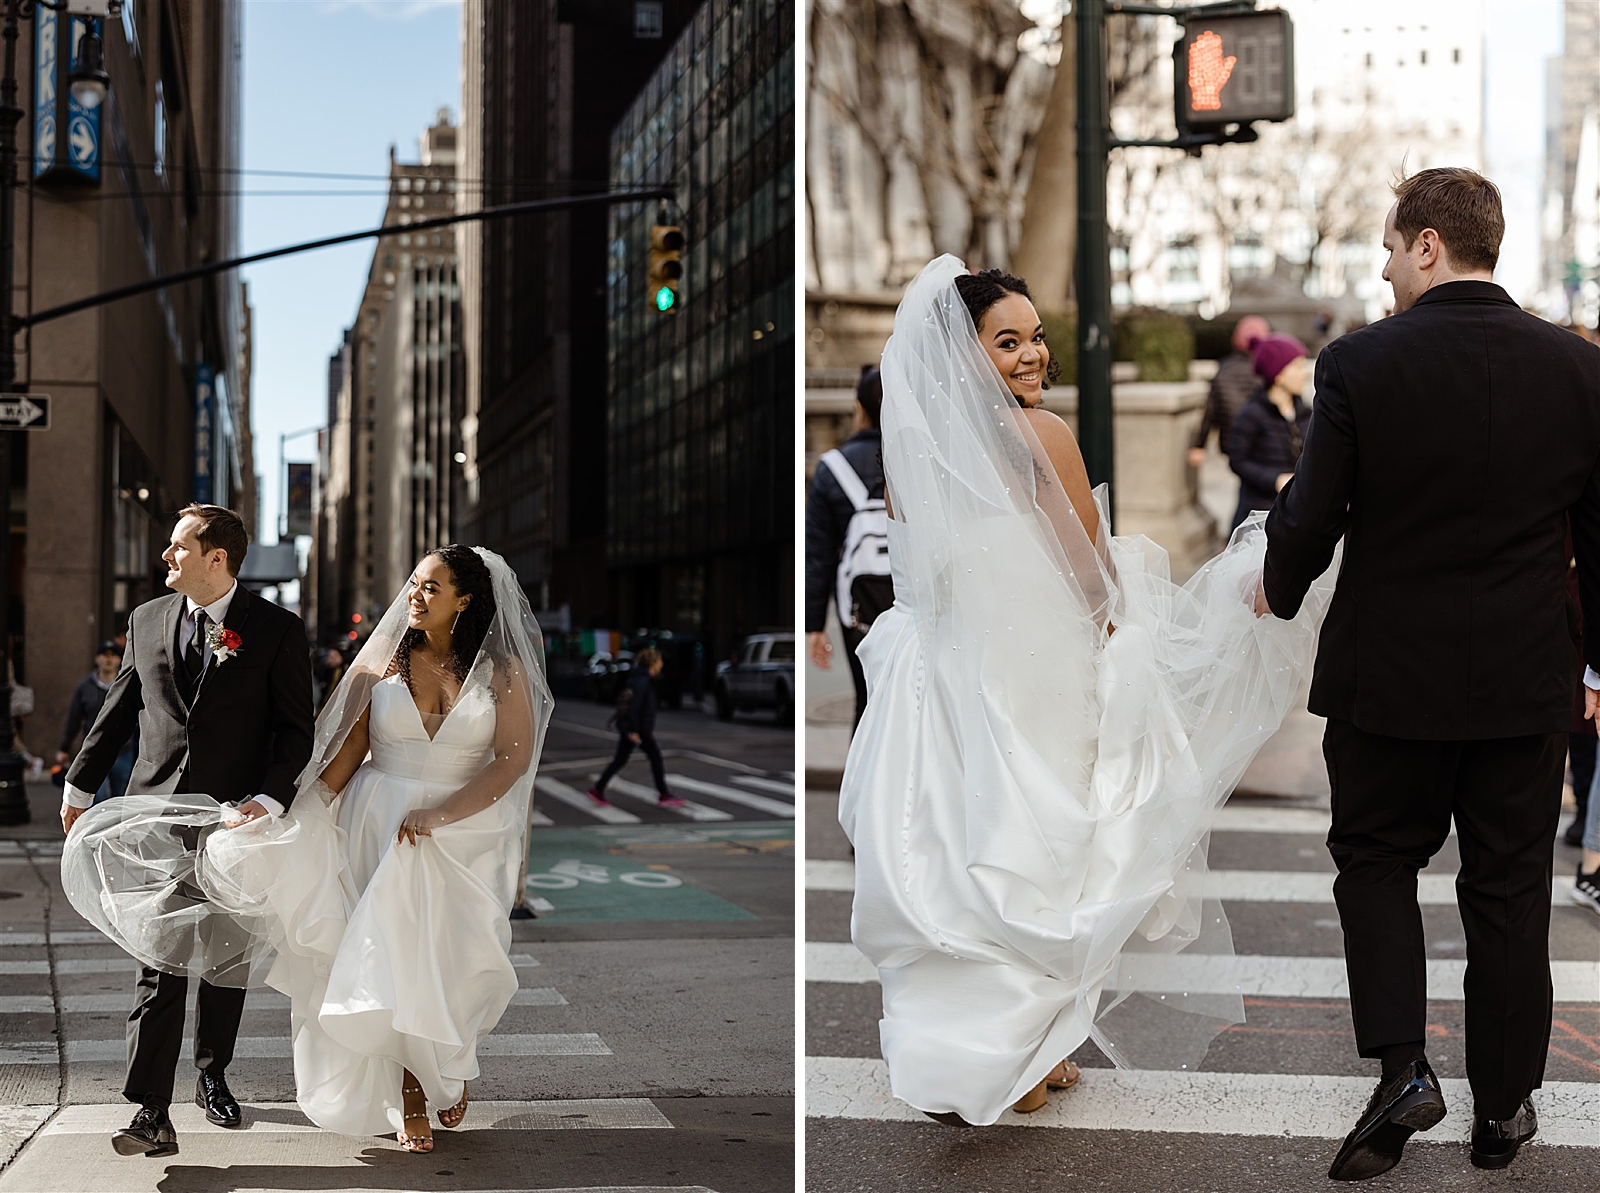 Left photo: Bride and groom are all smiles as they walk through a cross walk in full wedding attire. 
Right photo: Bride smiles back at the camera as she and her Groom cross the street in full wedding attire. 